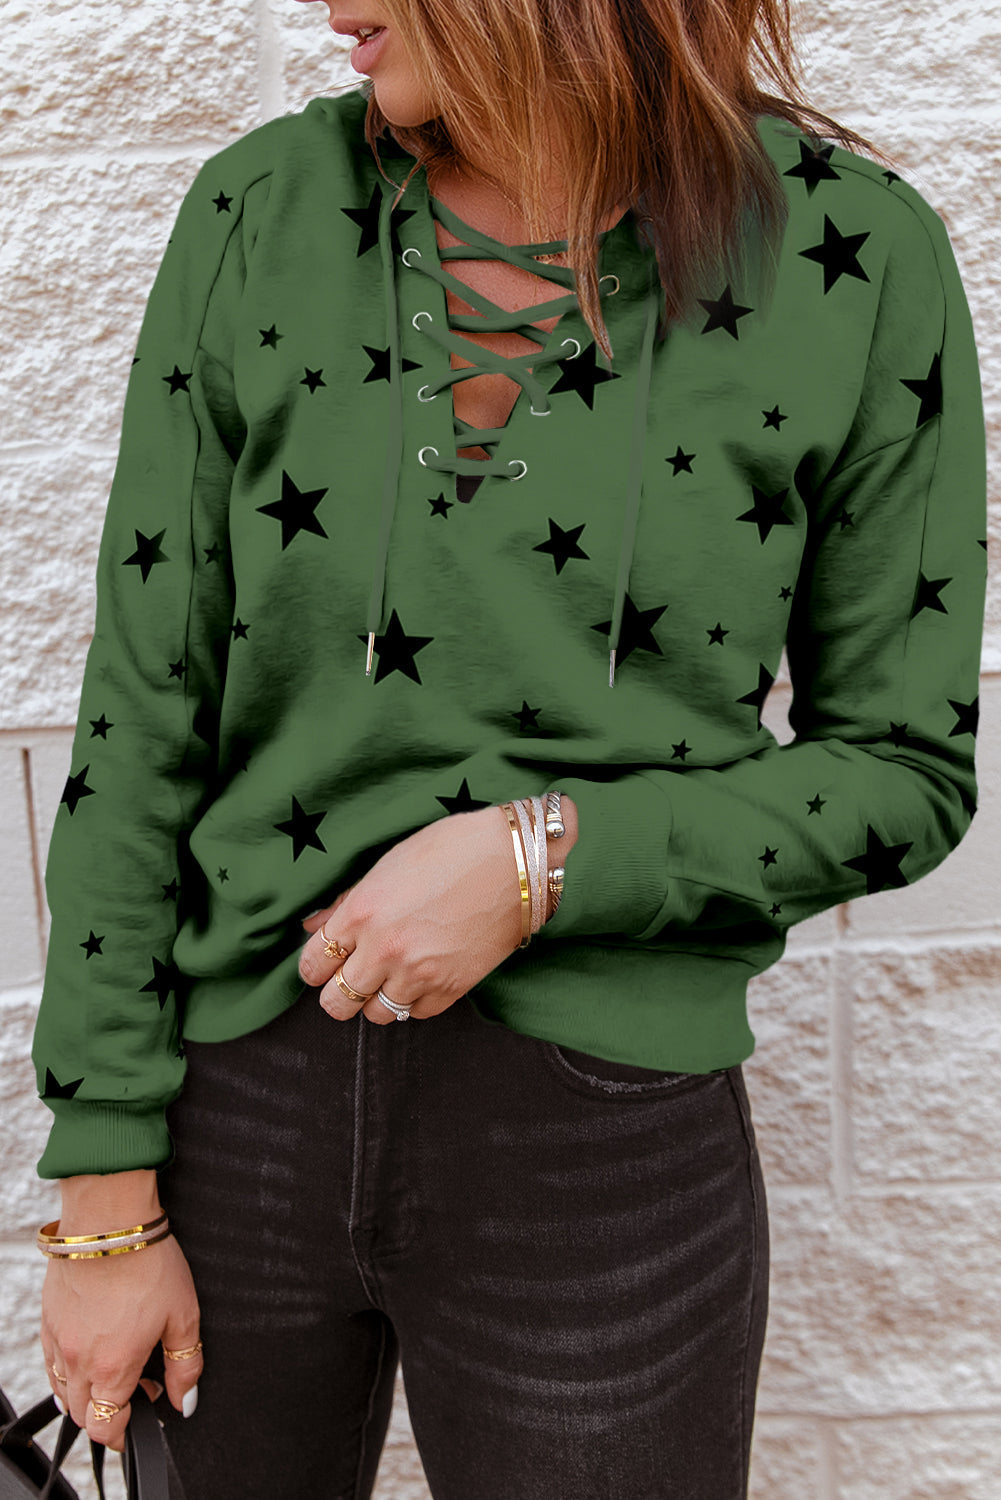 Star Pattern Lace-Up Hoodie - Green / S - Women’s Clothing & Accessories - Shirts & Tops - 1 - 2024